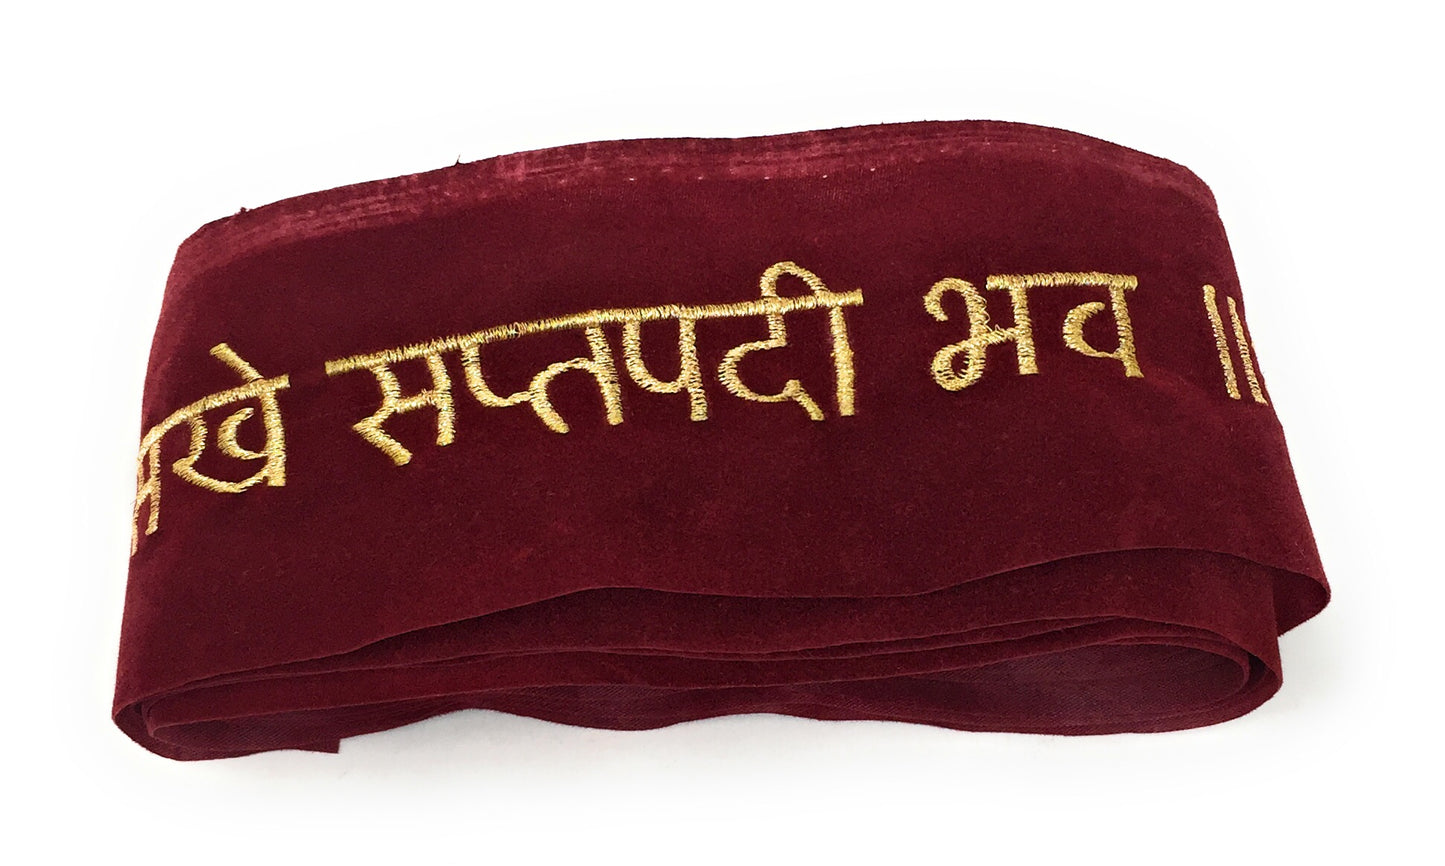 Customized lace of Sada Saubhagyavati Bhav Lace with Your name and message Border Trim - 7 Meter Long